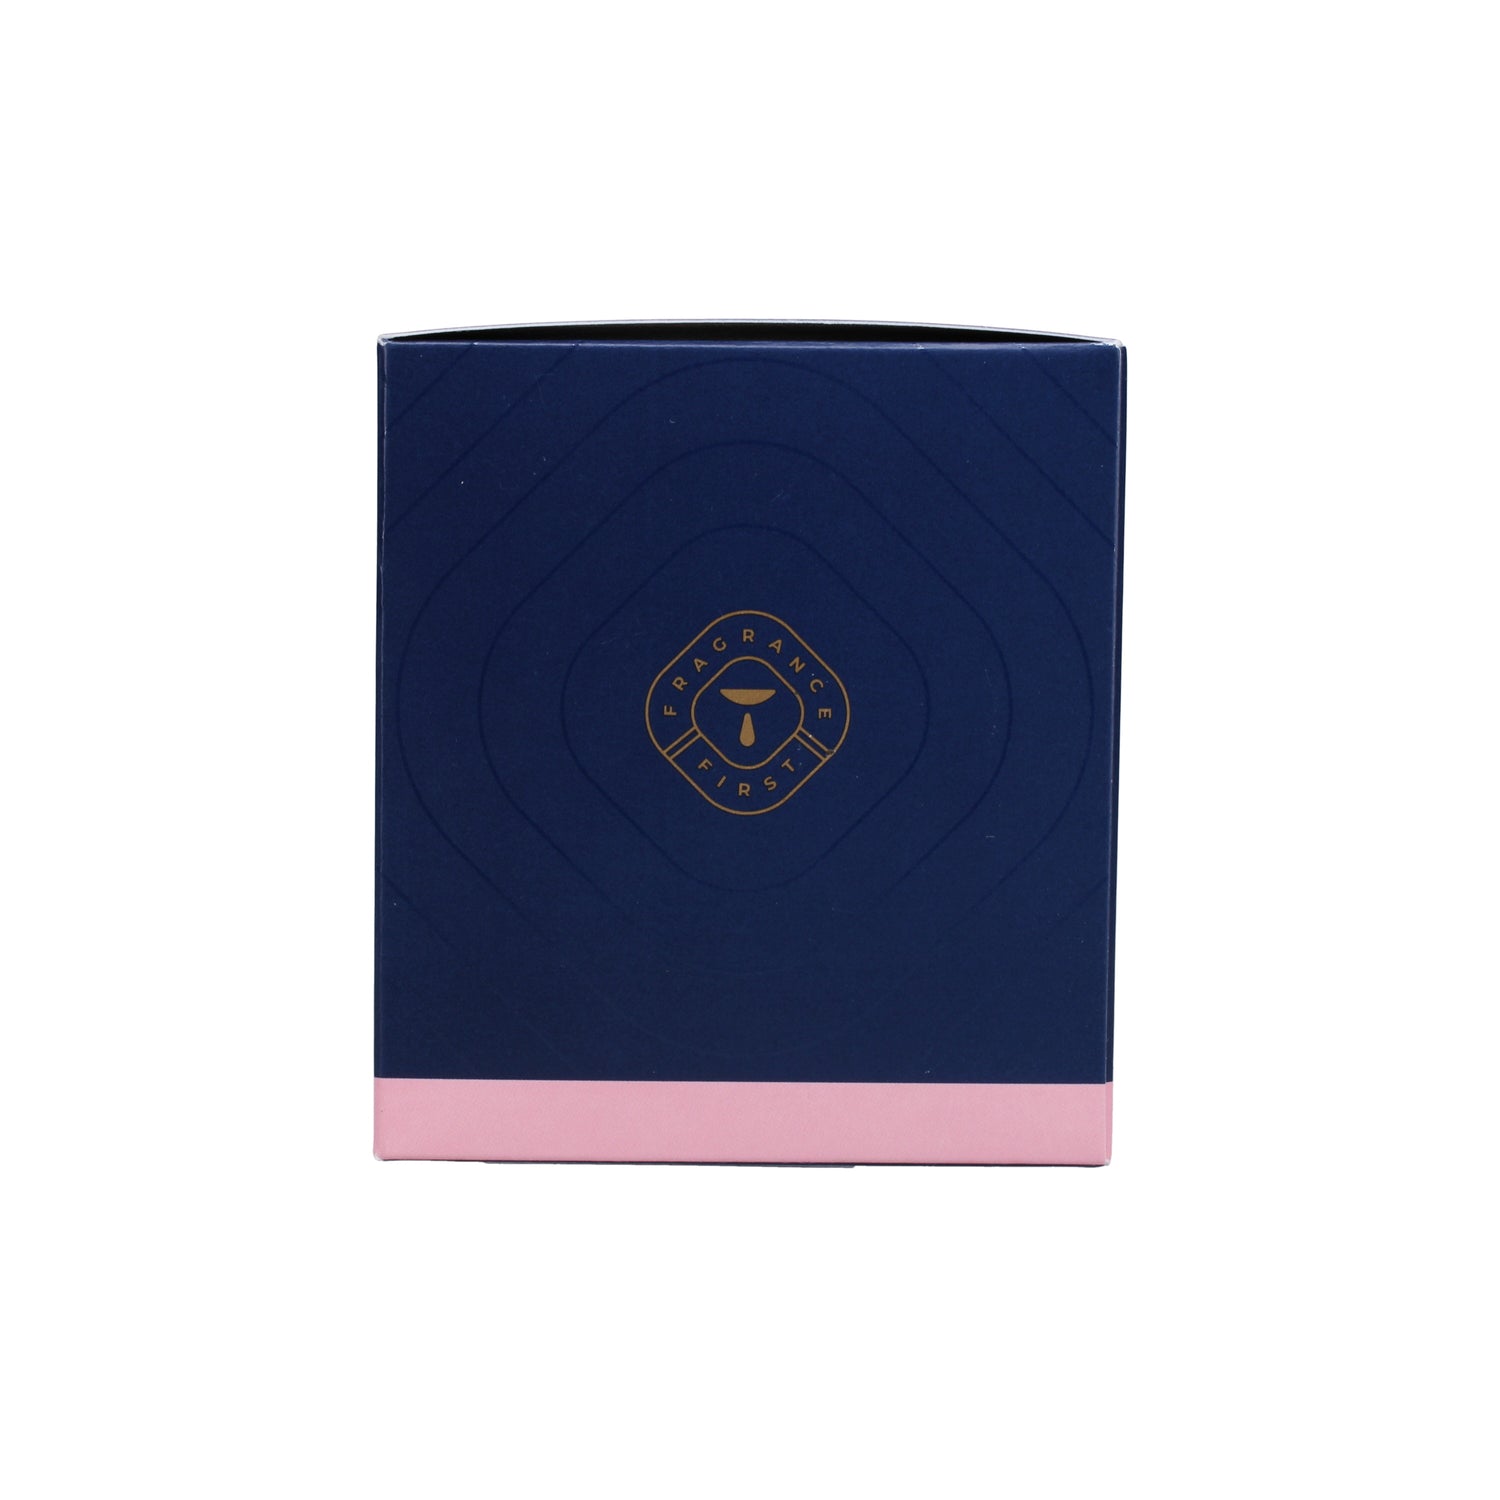 No. 63 Peony Rosewater 7 oz. Candle in Signature Box Image 4